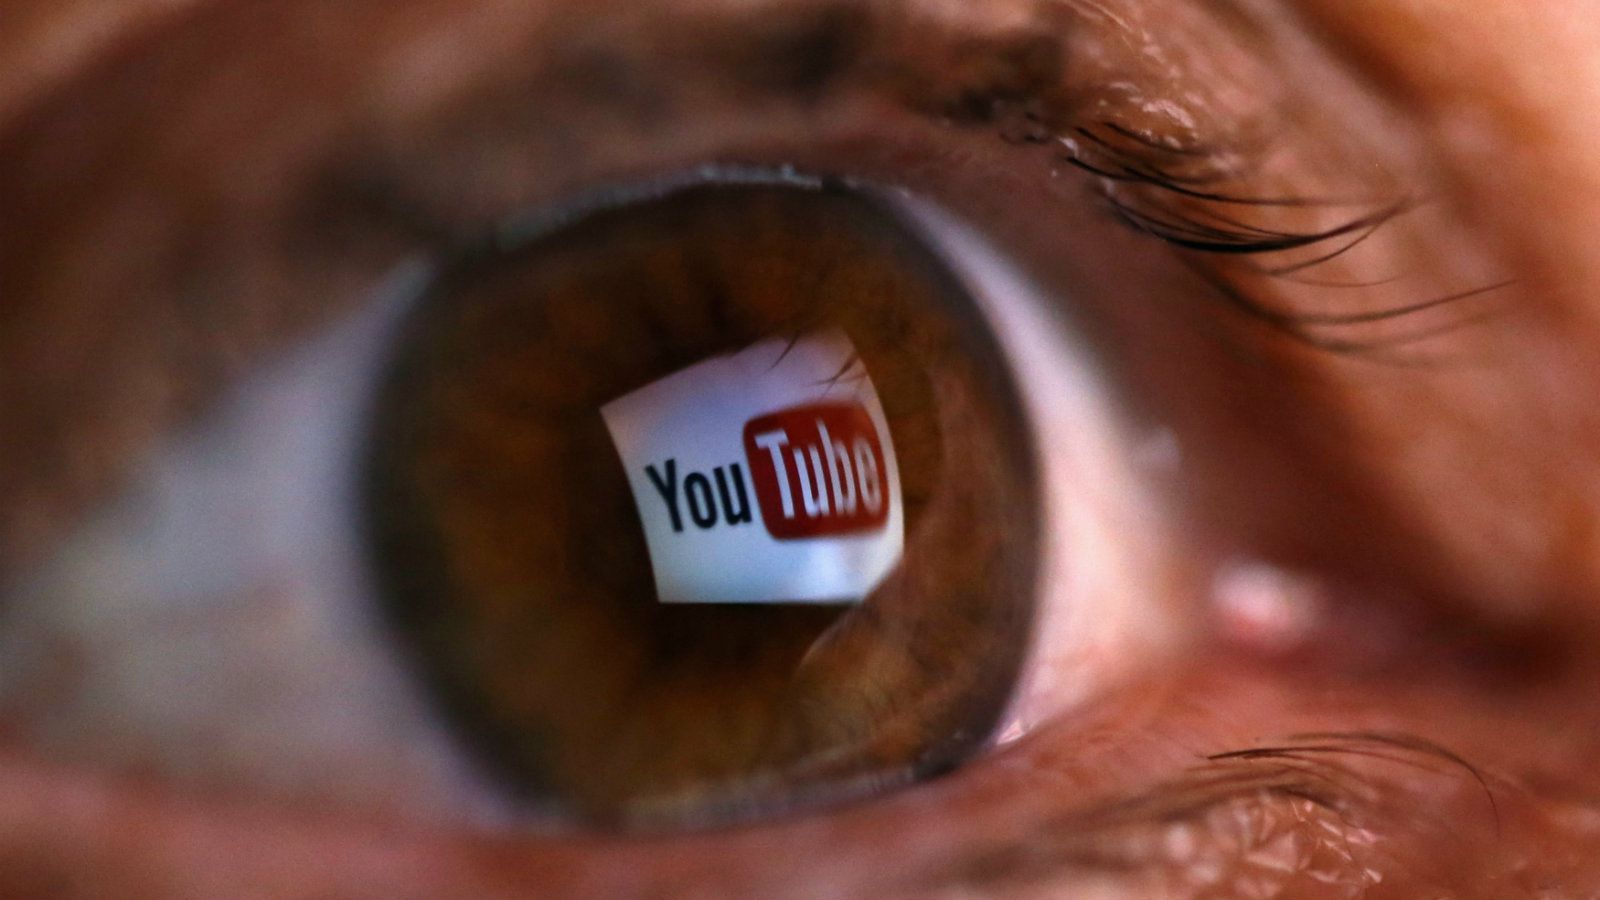 Image: YouTube claims to be banning all “bigoted” videos but won’t stop bigotry of the hate-filled Left and its attacks on Trump, conservatives and Christians